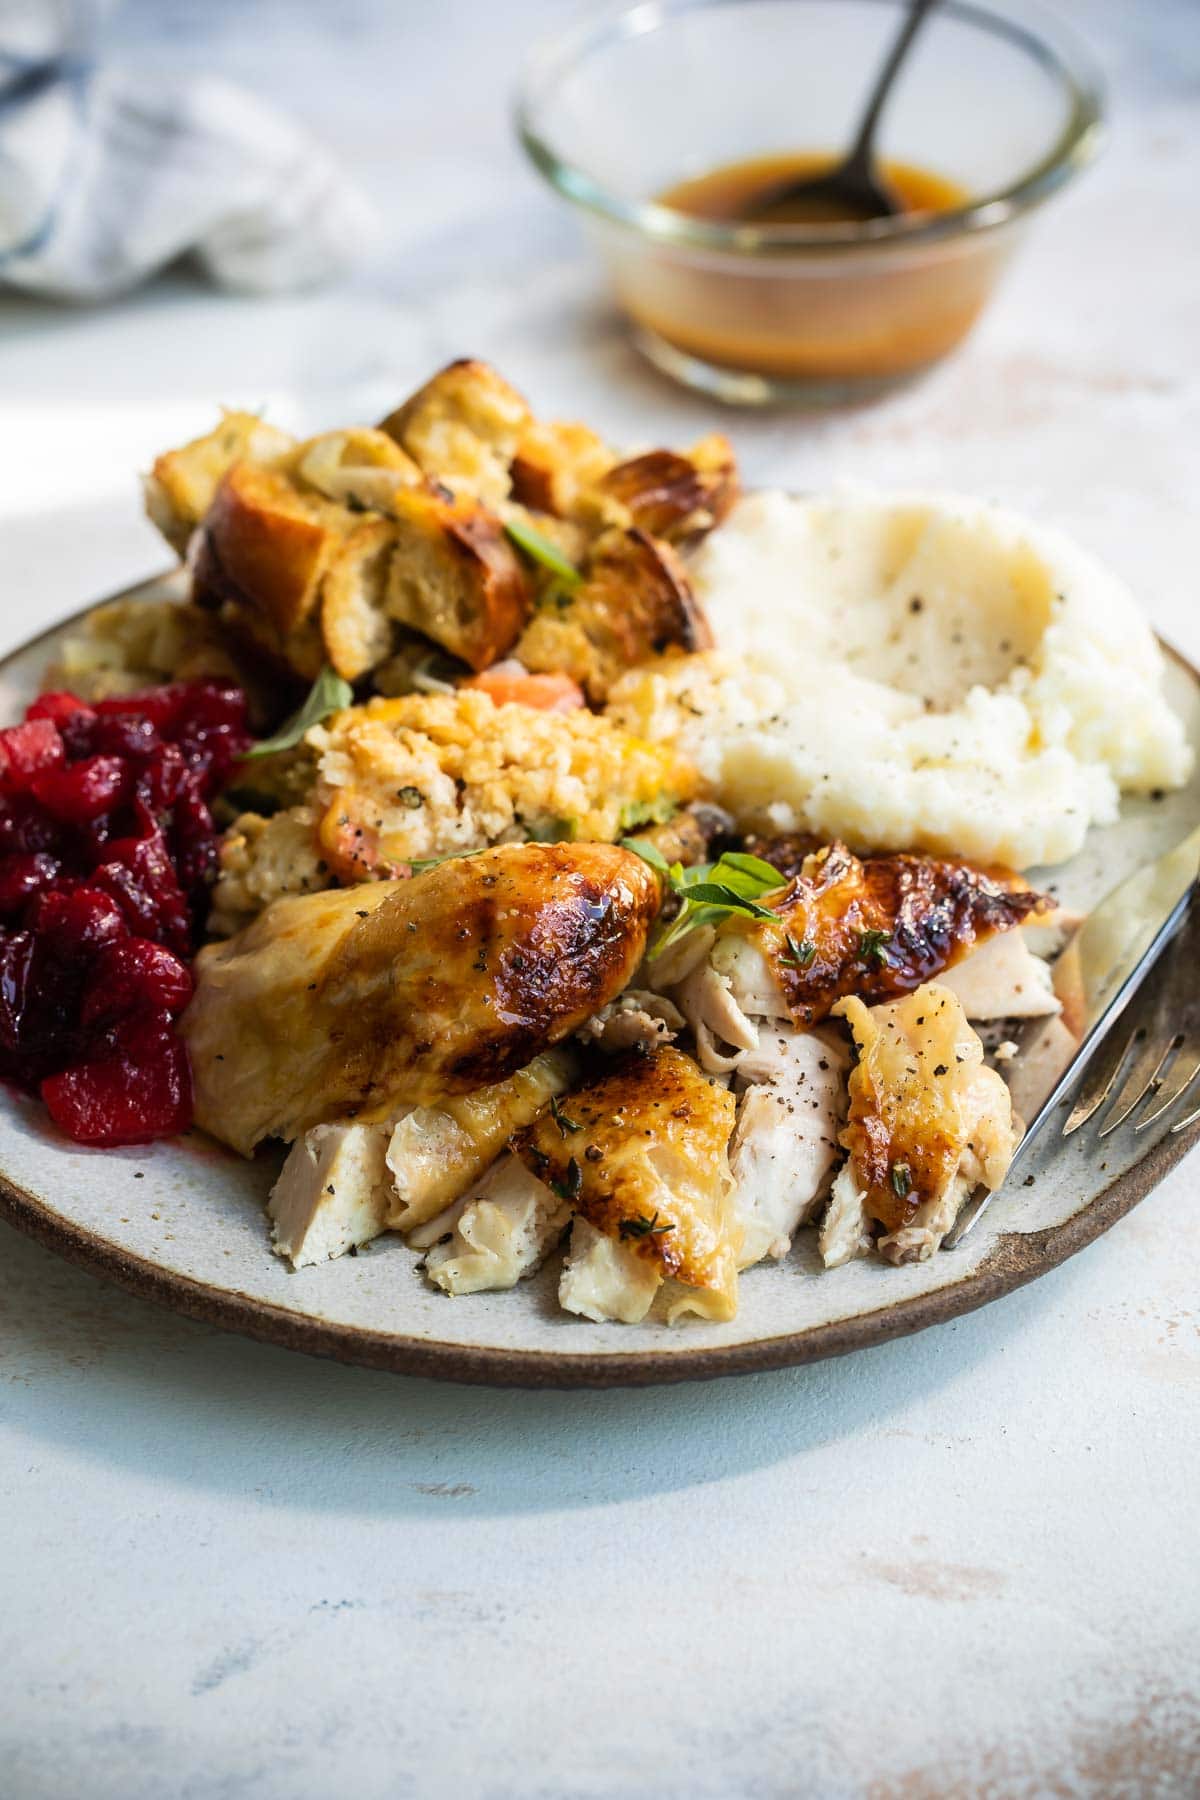 A plate of roasted Cornish hen, mashed potatoes, stuffing, vegetable casserole, and cranberry sauce.